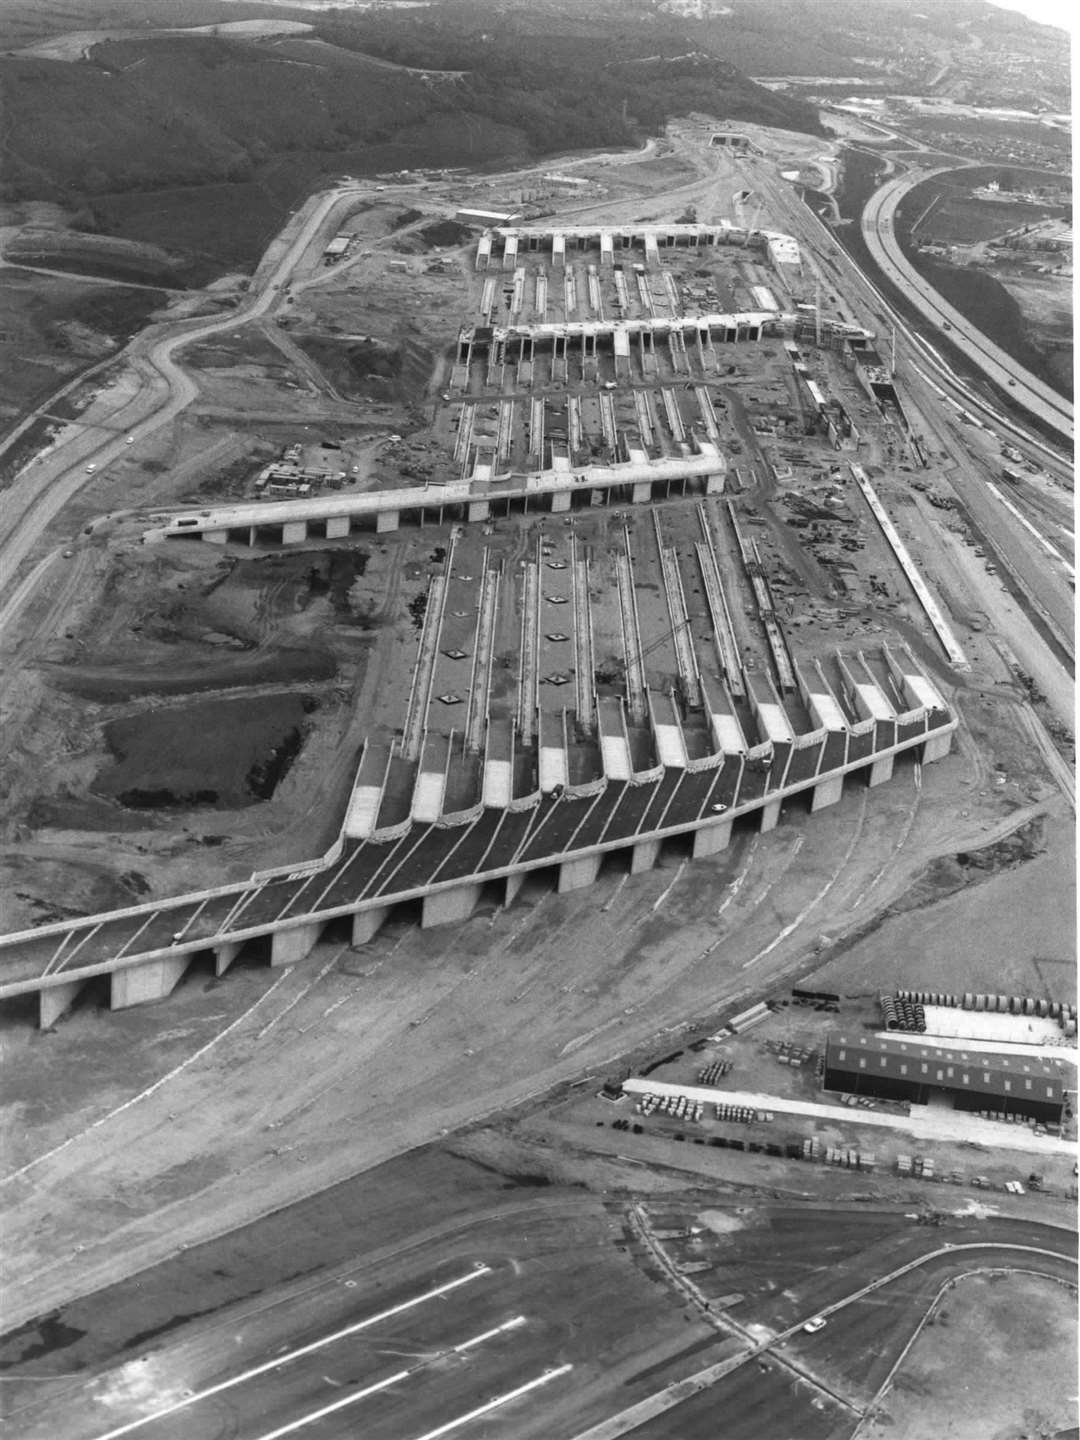 The Folkestone terminal of the Channel Tunnel under construction in 1991 - three years before it became operational